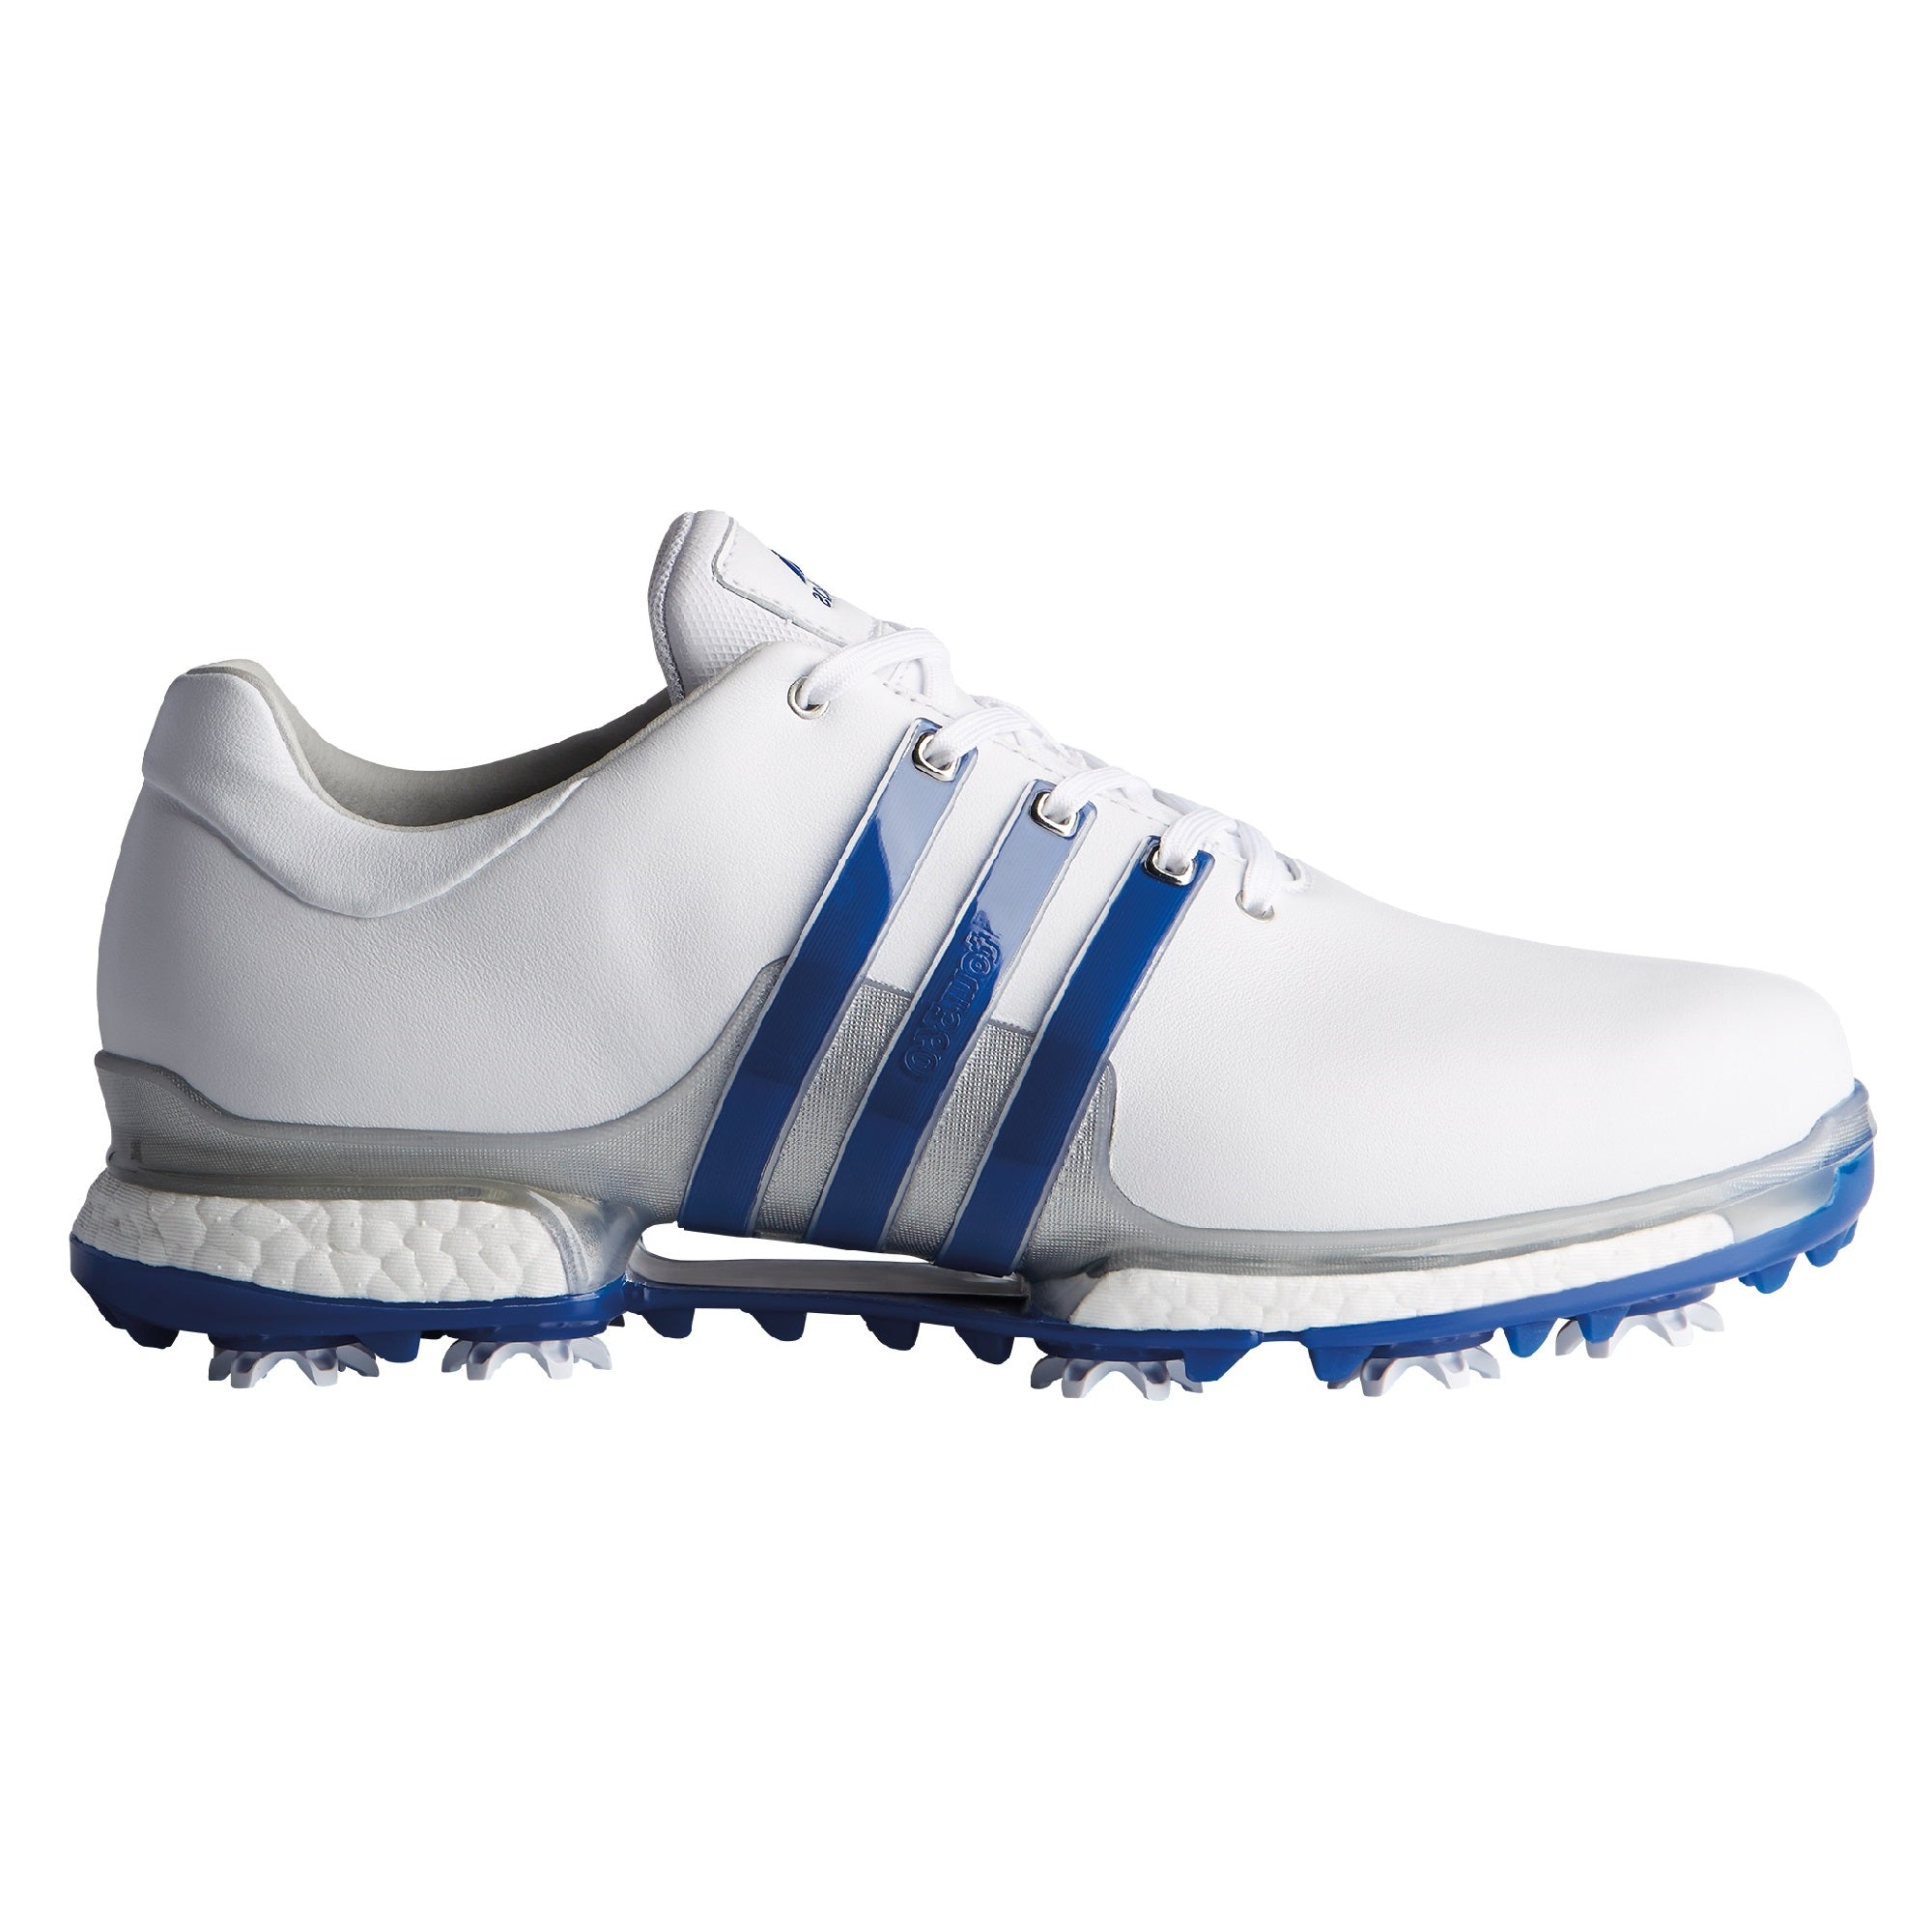 adidas 360 boost golf shoes